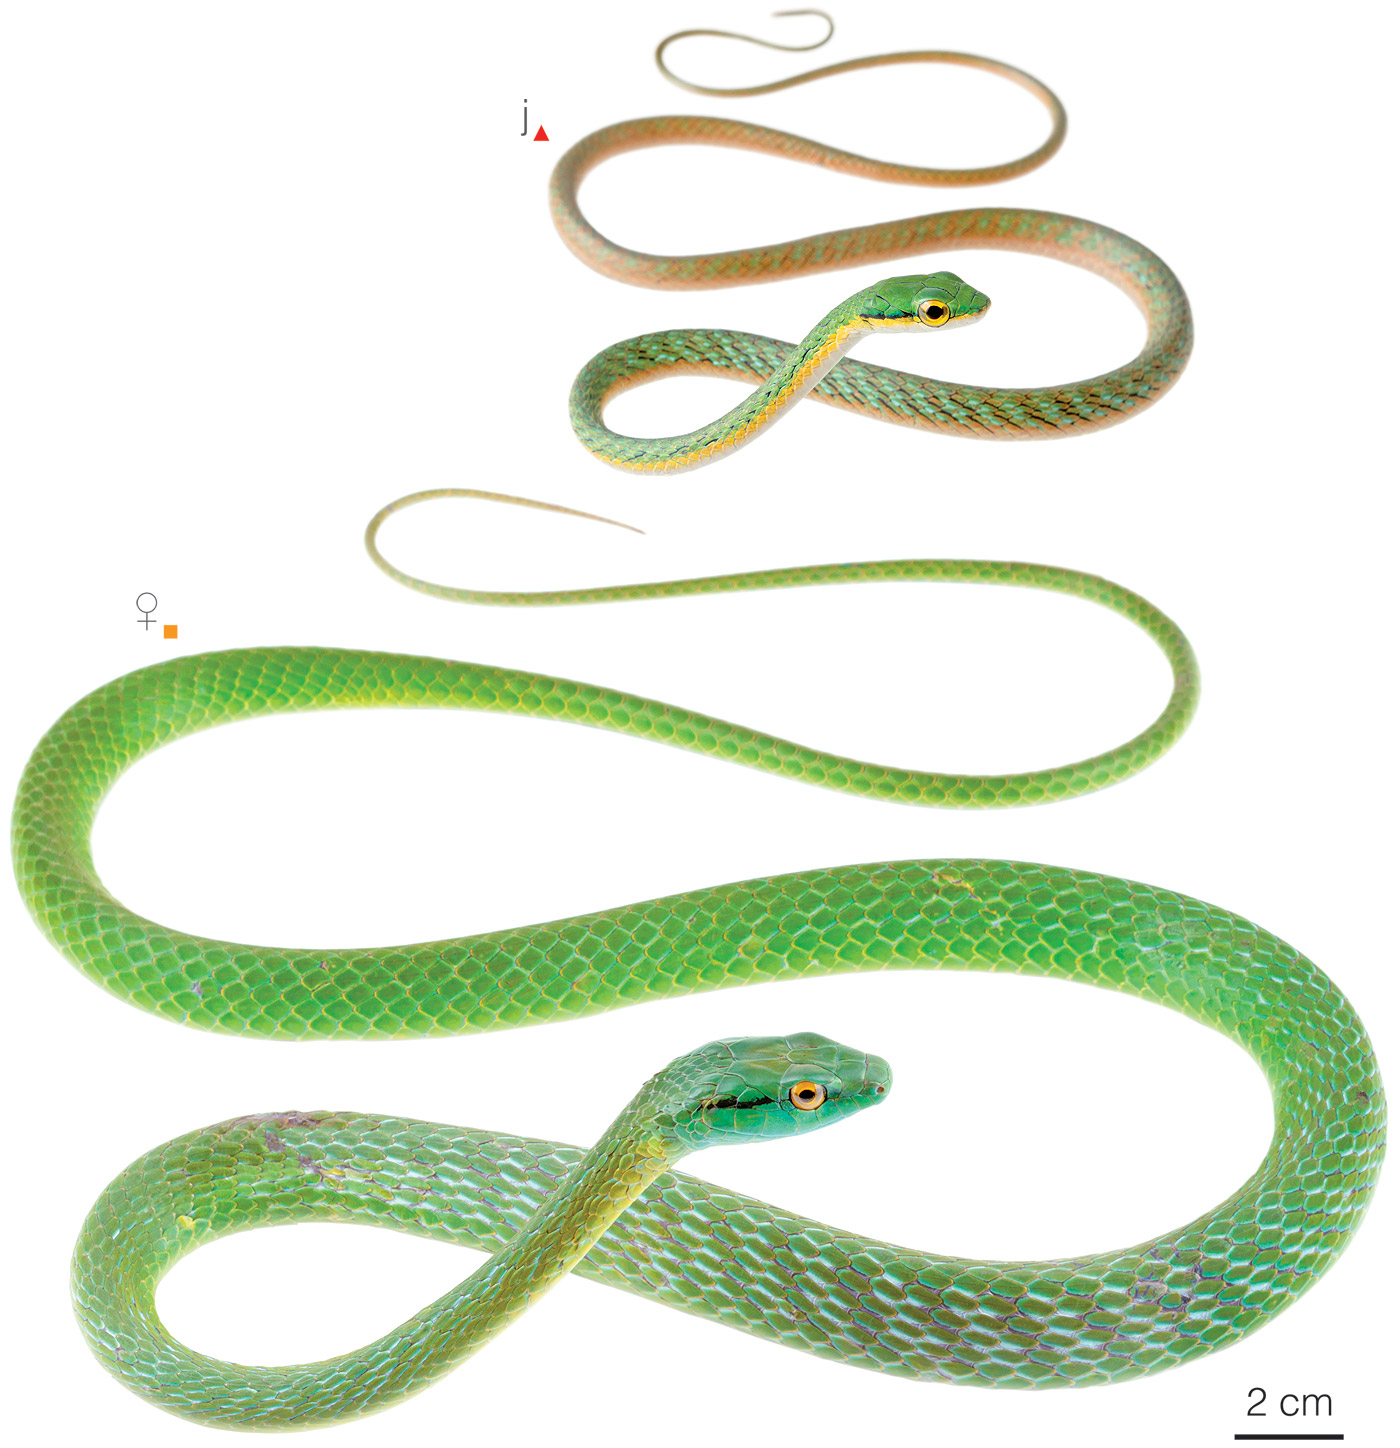 Figure showing variation among individuals of Leptophis occidentalis